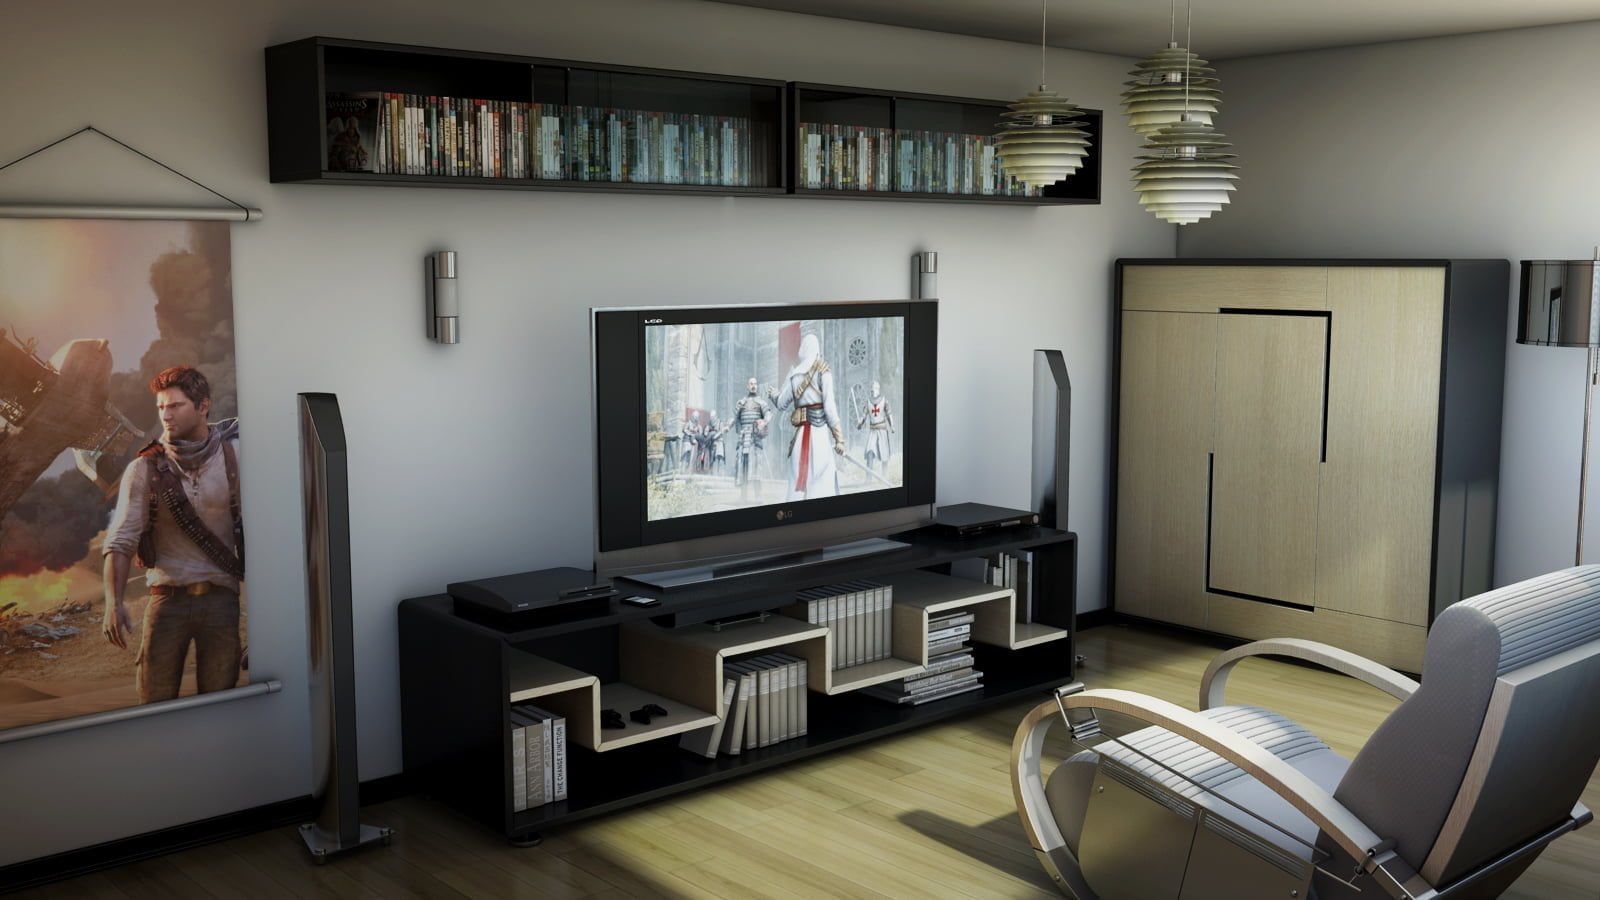 15 Awesome Video Game Room Design Ideas You Must See - Style Motivation